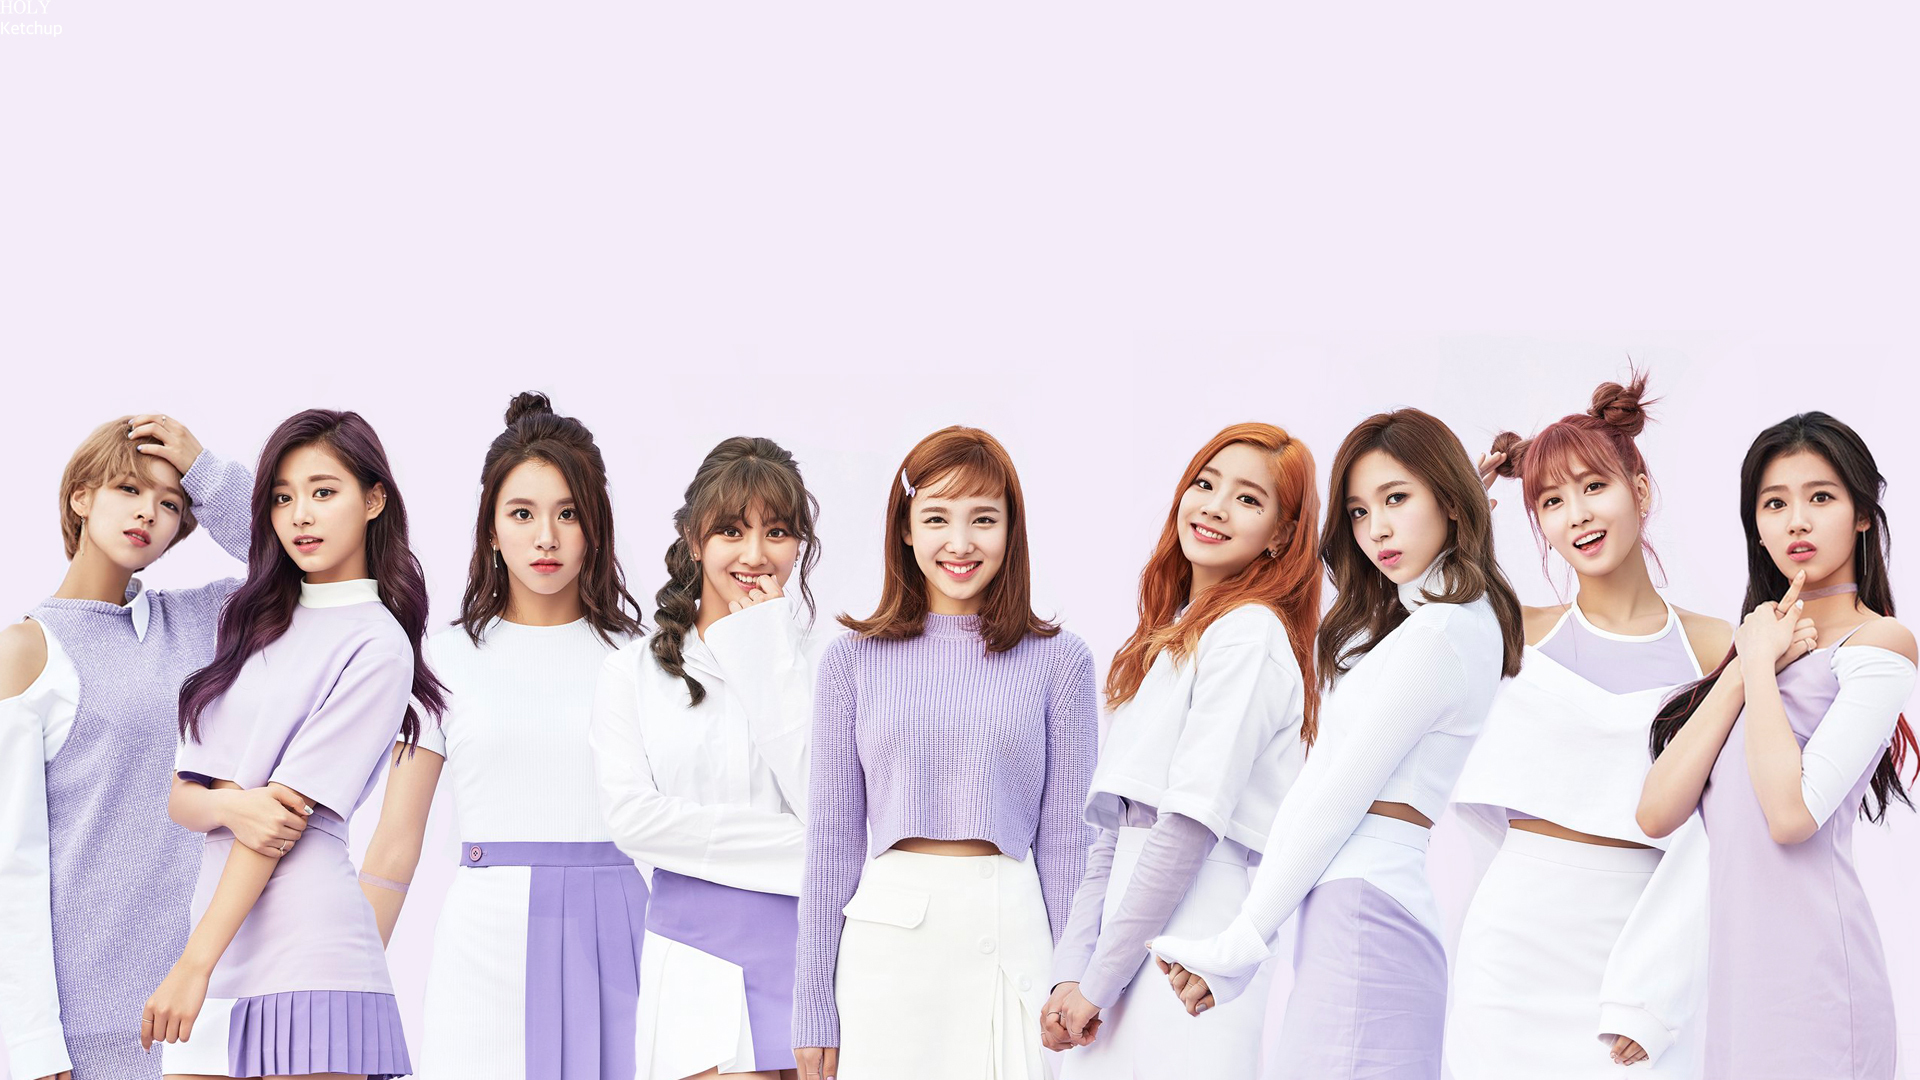 Twice's latest mini-album 'More & More' is a perfect pop album and great for the summer. 